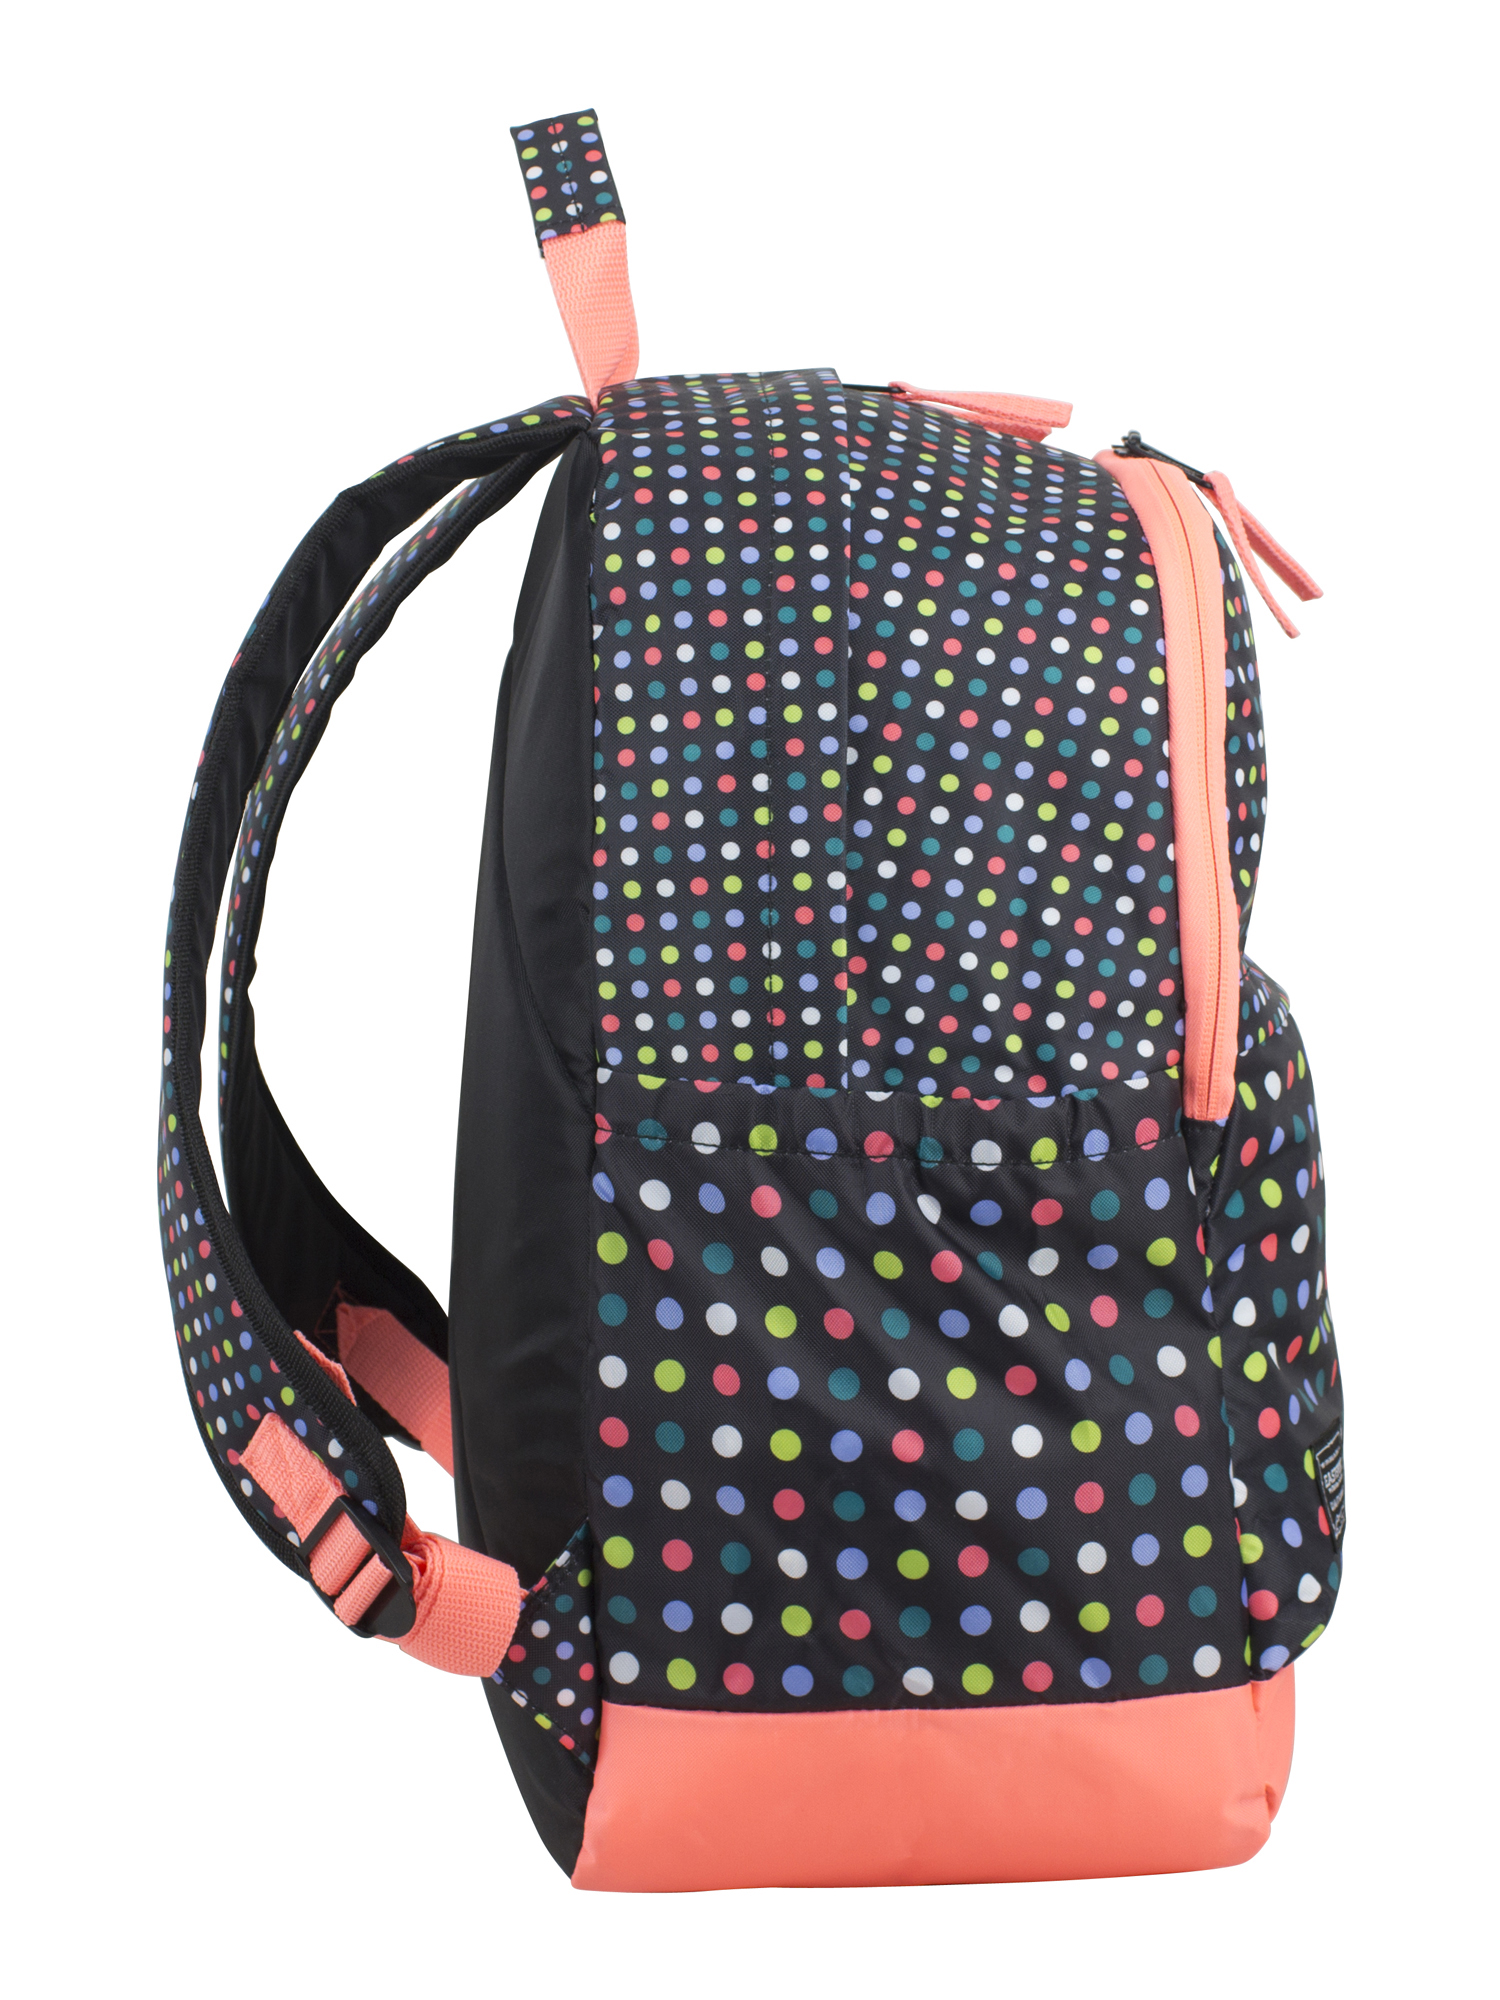 Emma Girl's Student Backpack with Computer Pocket - image 2 of 6